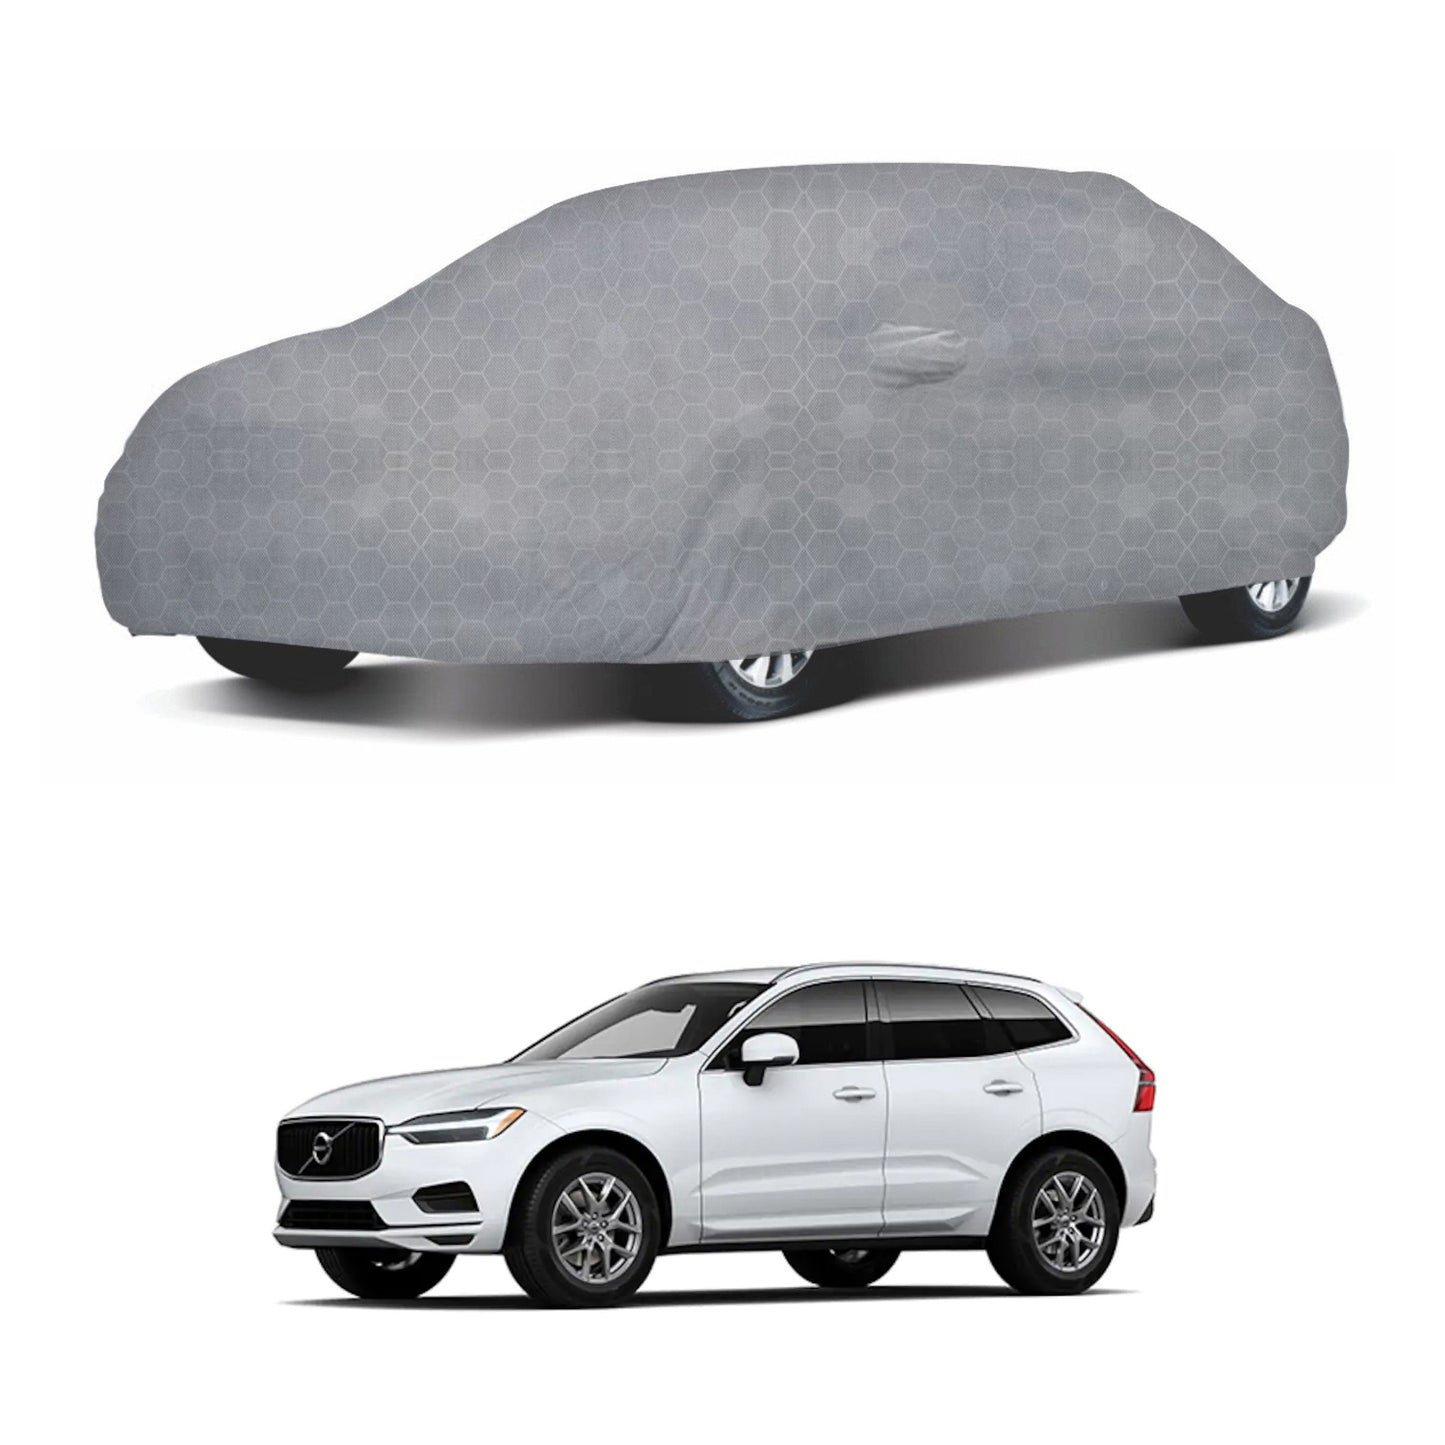 Oshotto 100% Dust Proof, Water Resistant Grey Car Body Cover with Mirror Pocket For Volvo XC60